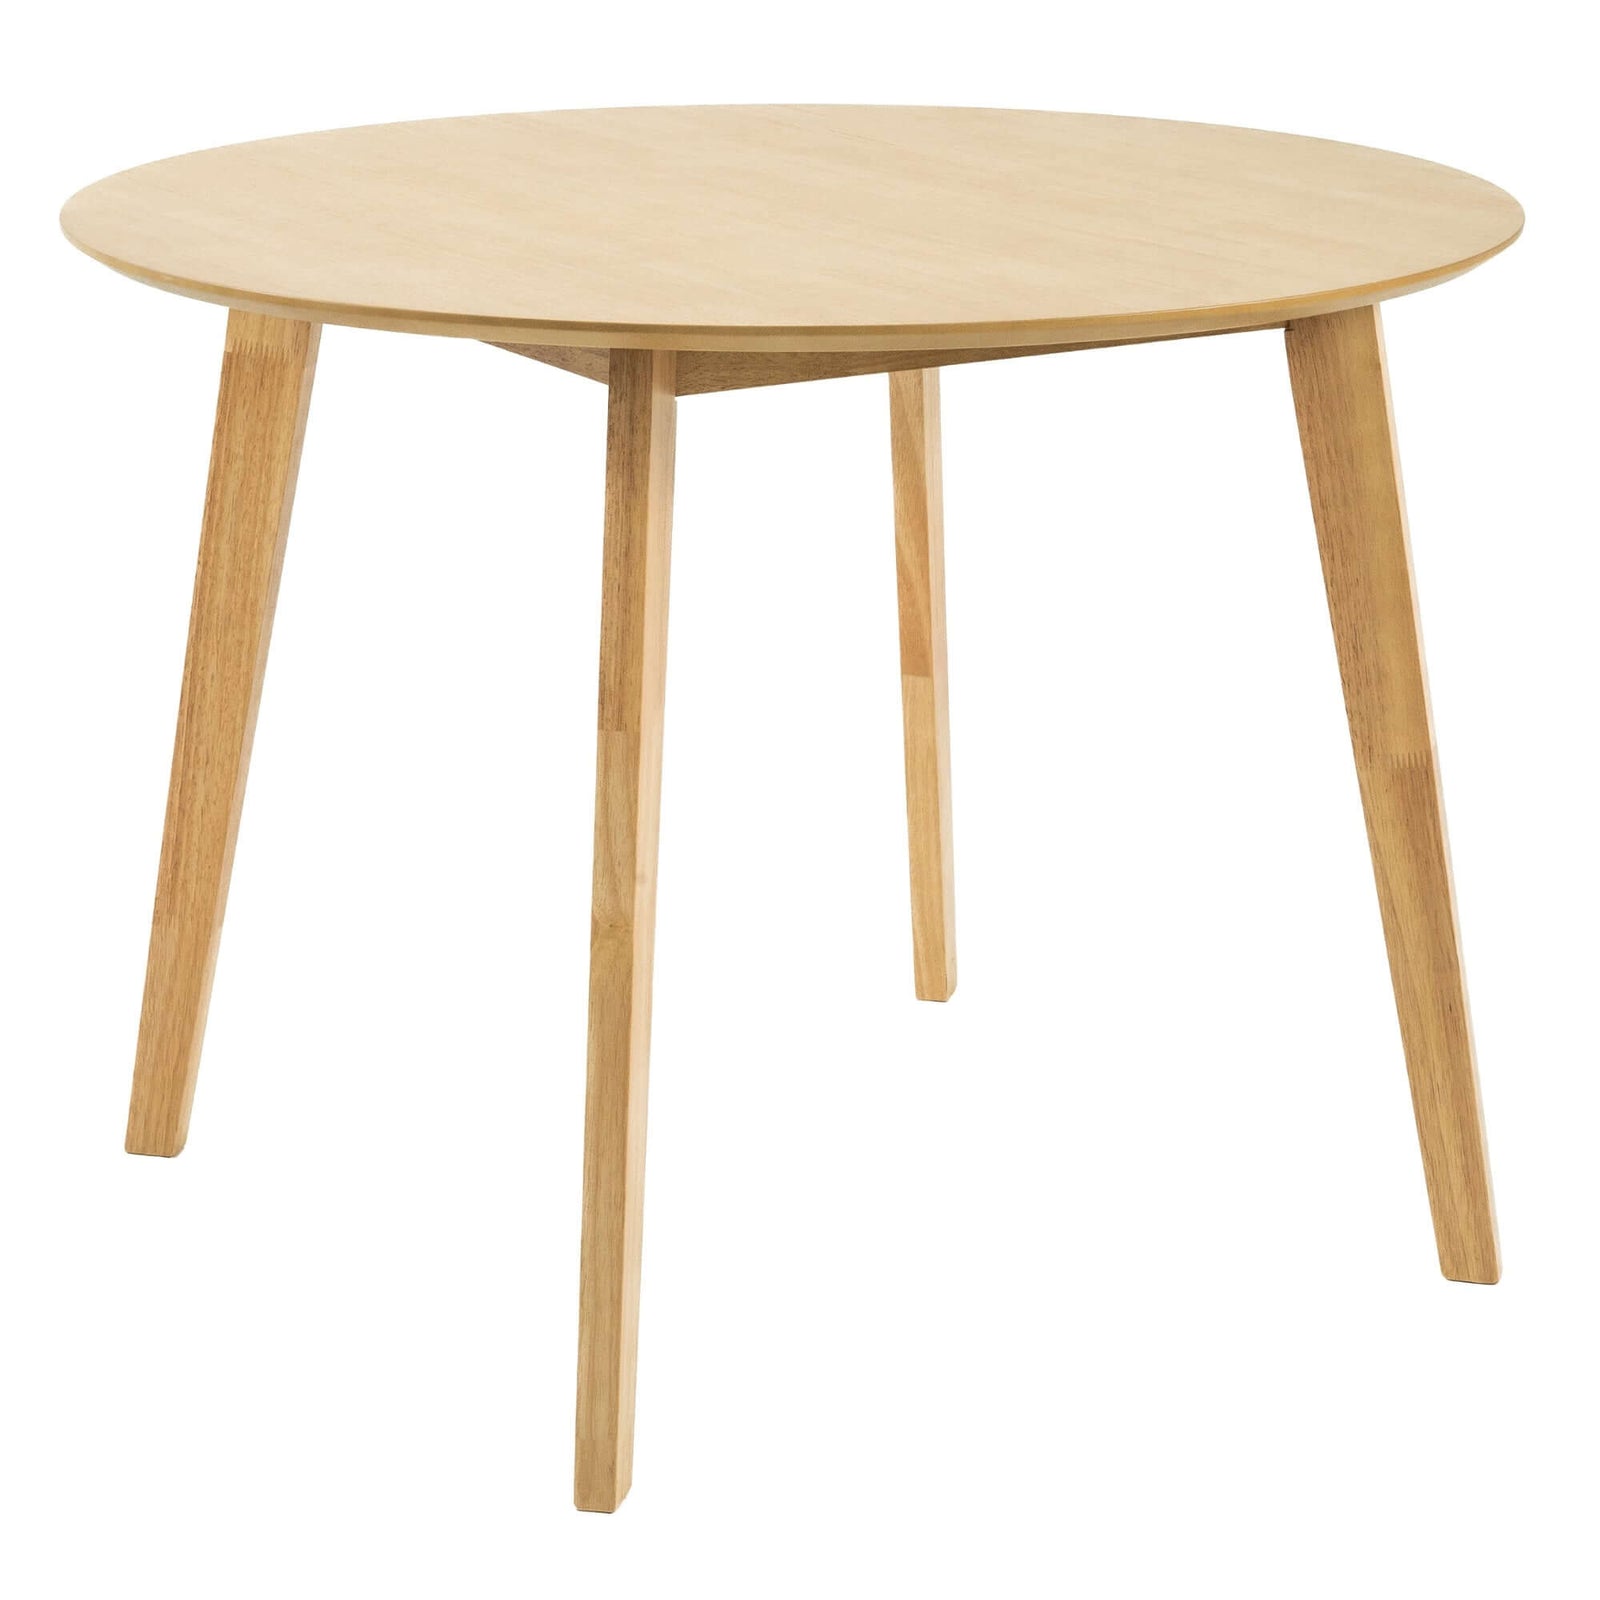 Cusco 100cm Round Dining Table Scandinavian Style Solid Rubberwood Natural-Upinteriors